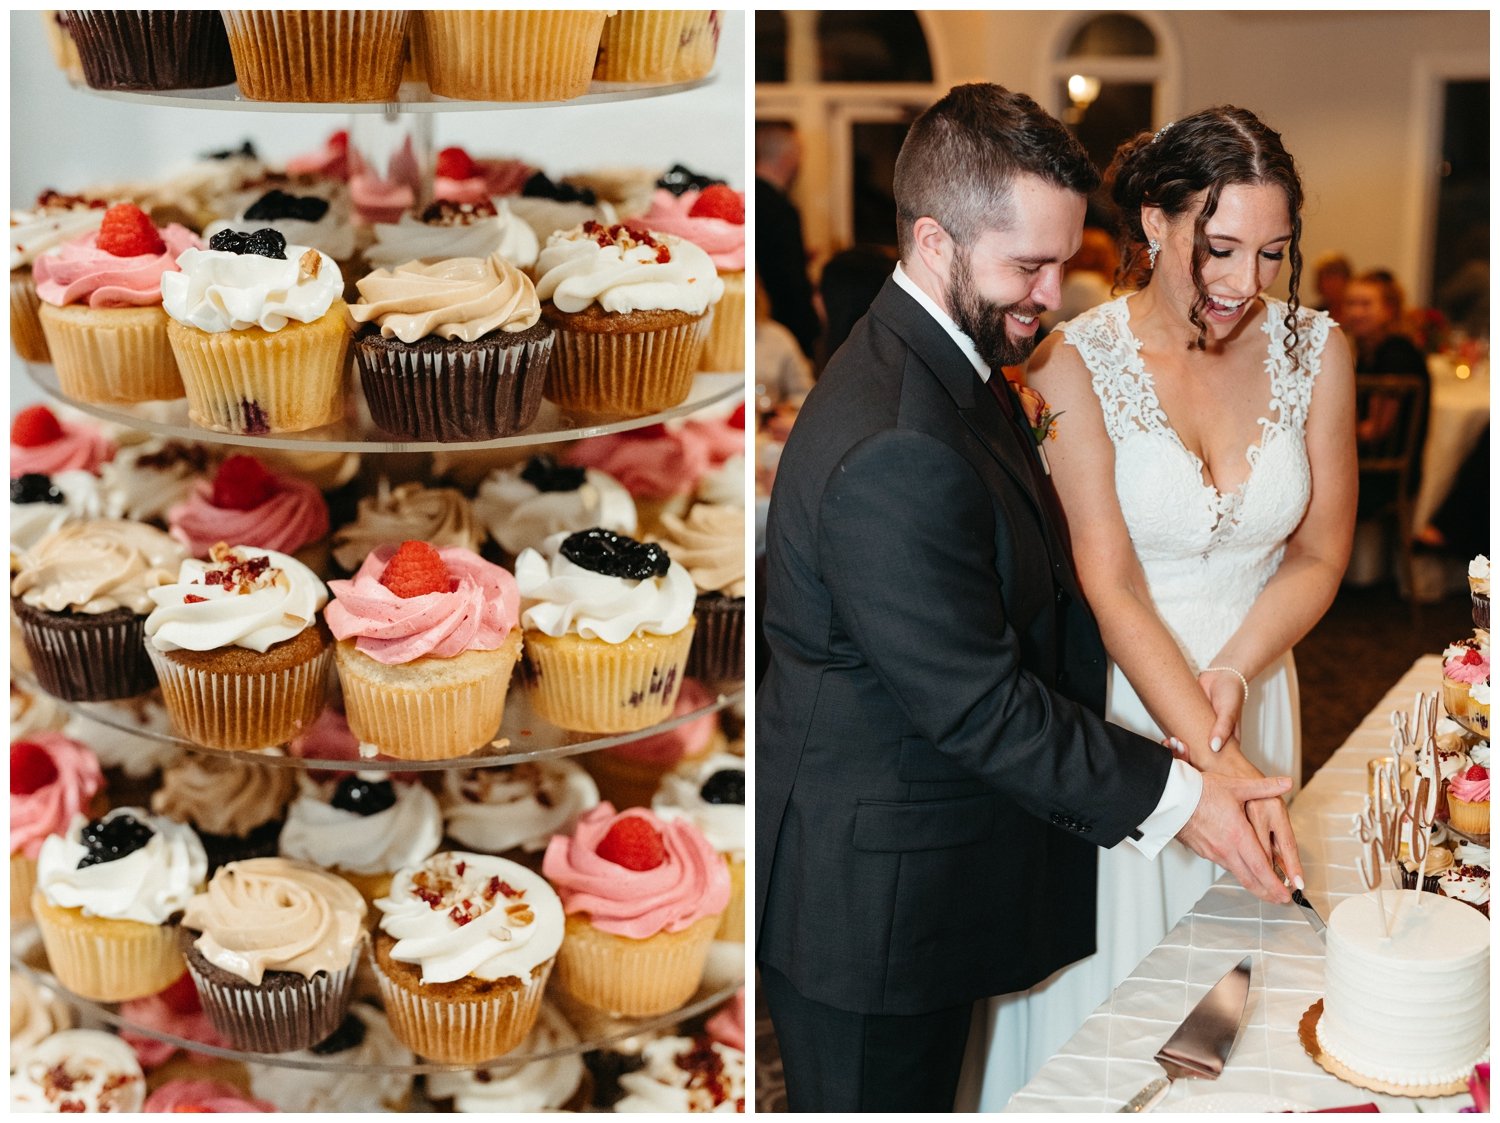 The couple cuts the cake next to a cupcake tower at the intimate destination wedding reception